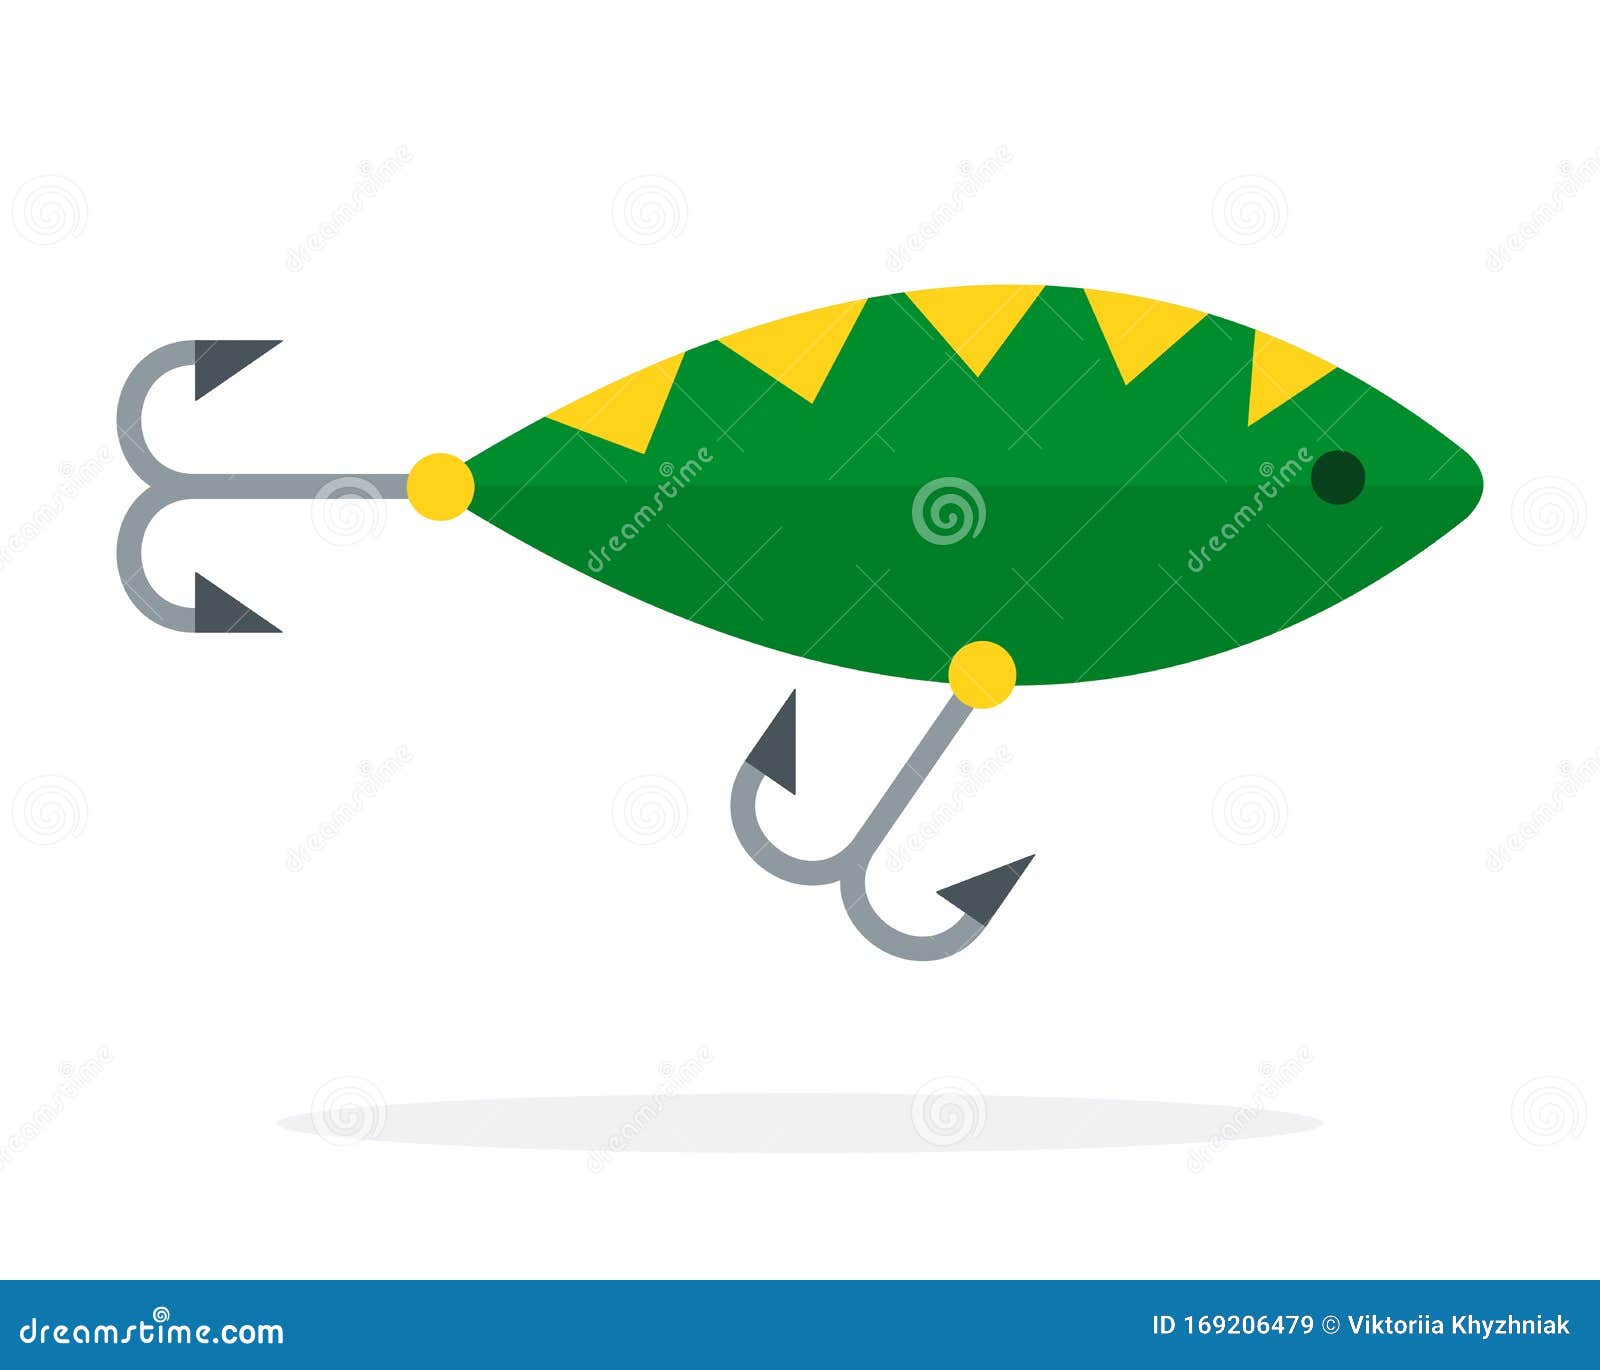 https://thumbs.dreamstime.com/z/lure-fishing-as-green-fish-double-hook-fishing-flat-isolated-lure-fishing-as-green-fish-double-hook-fishing-169206479.jpg